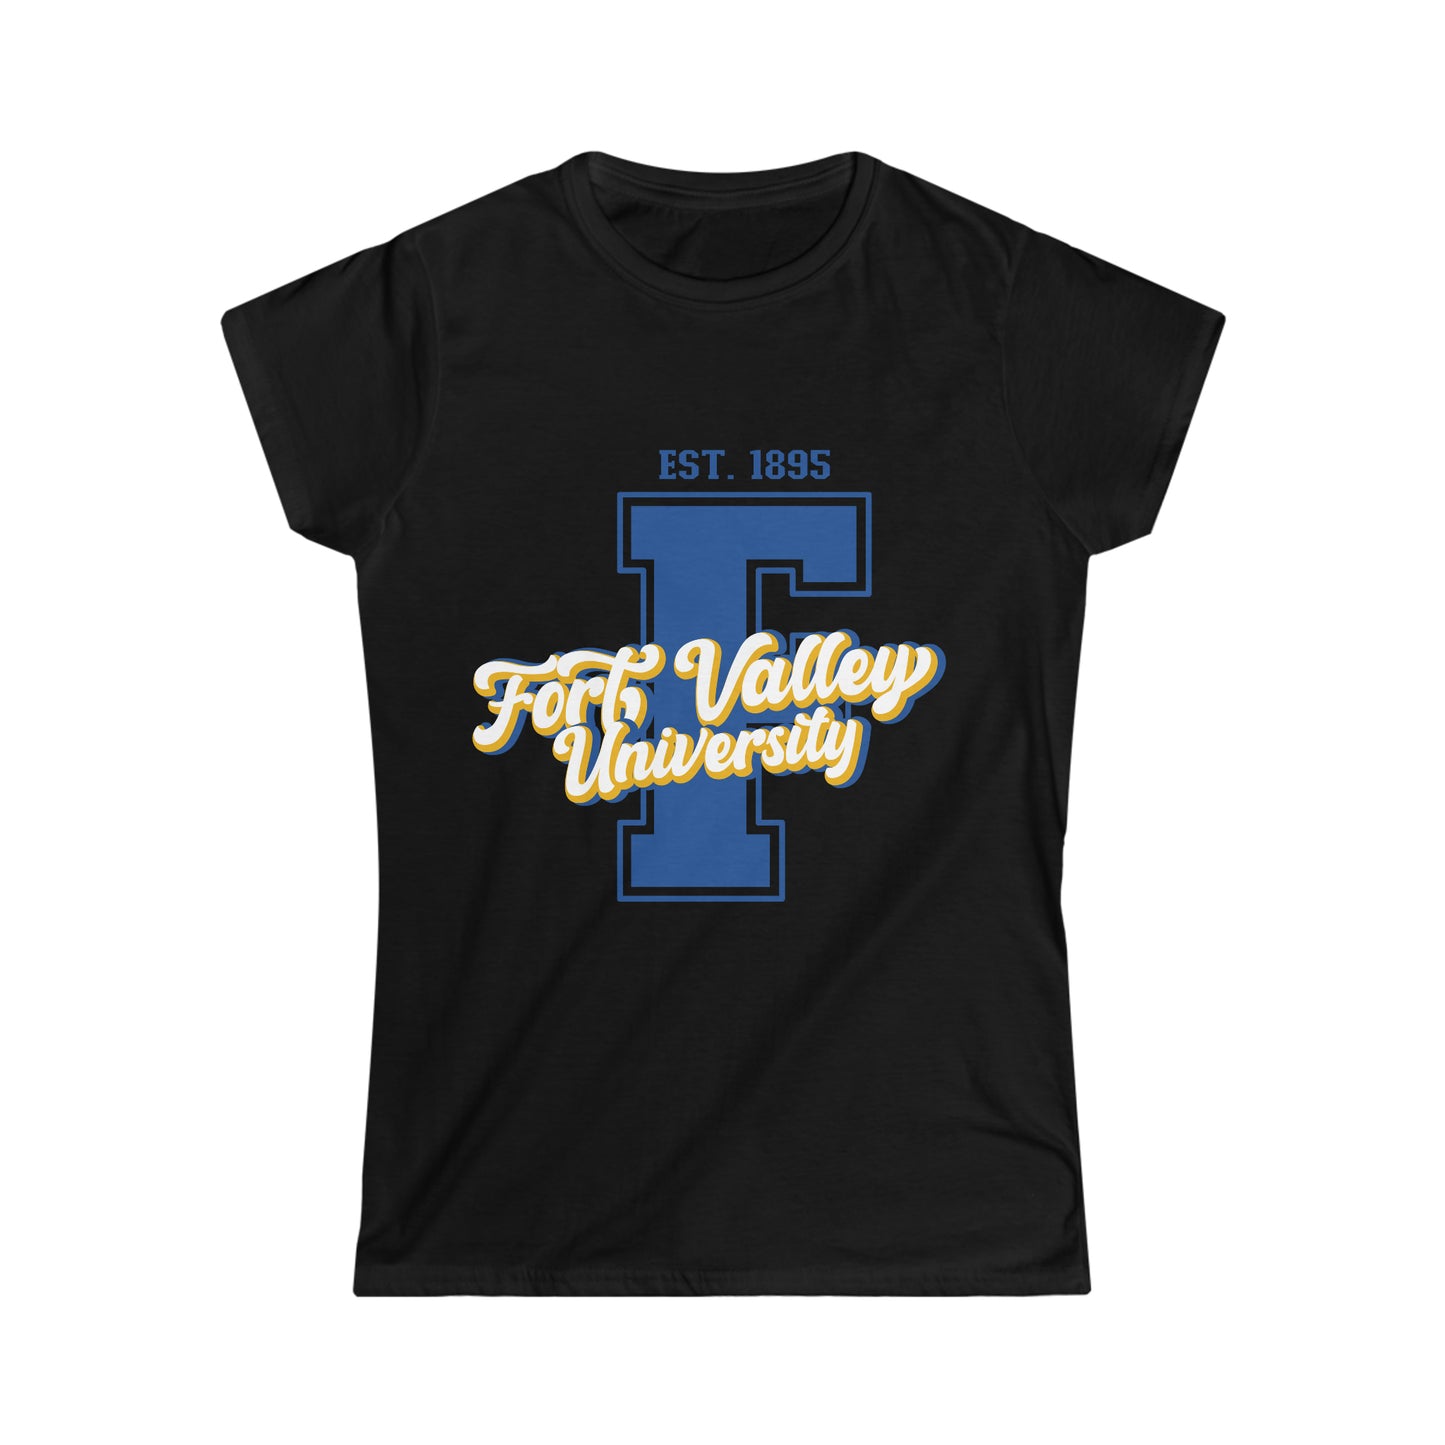 HBCU Love (Fort Valley State University "F" is for Fort Valley/ Women's Softstyle Tee)